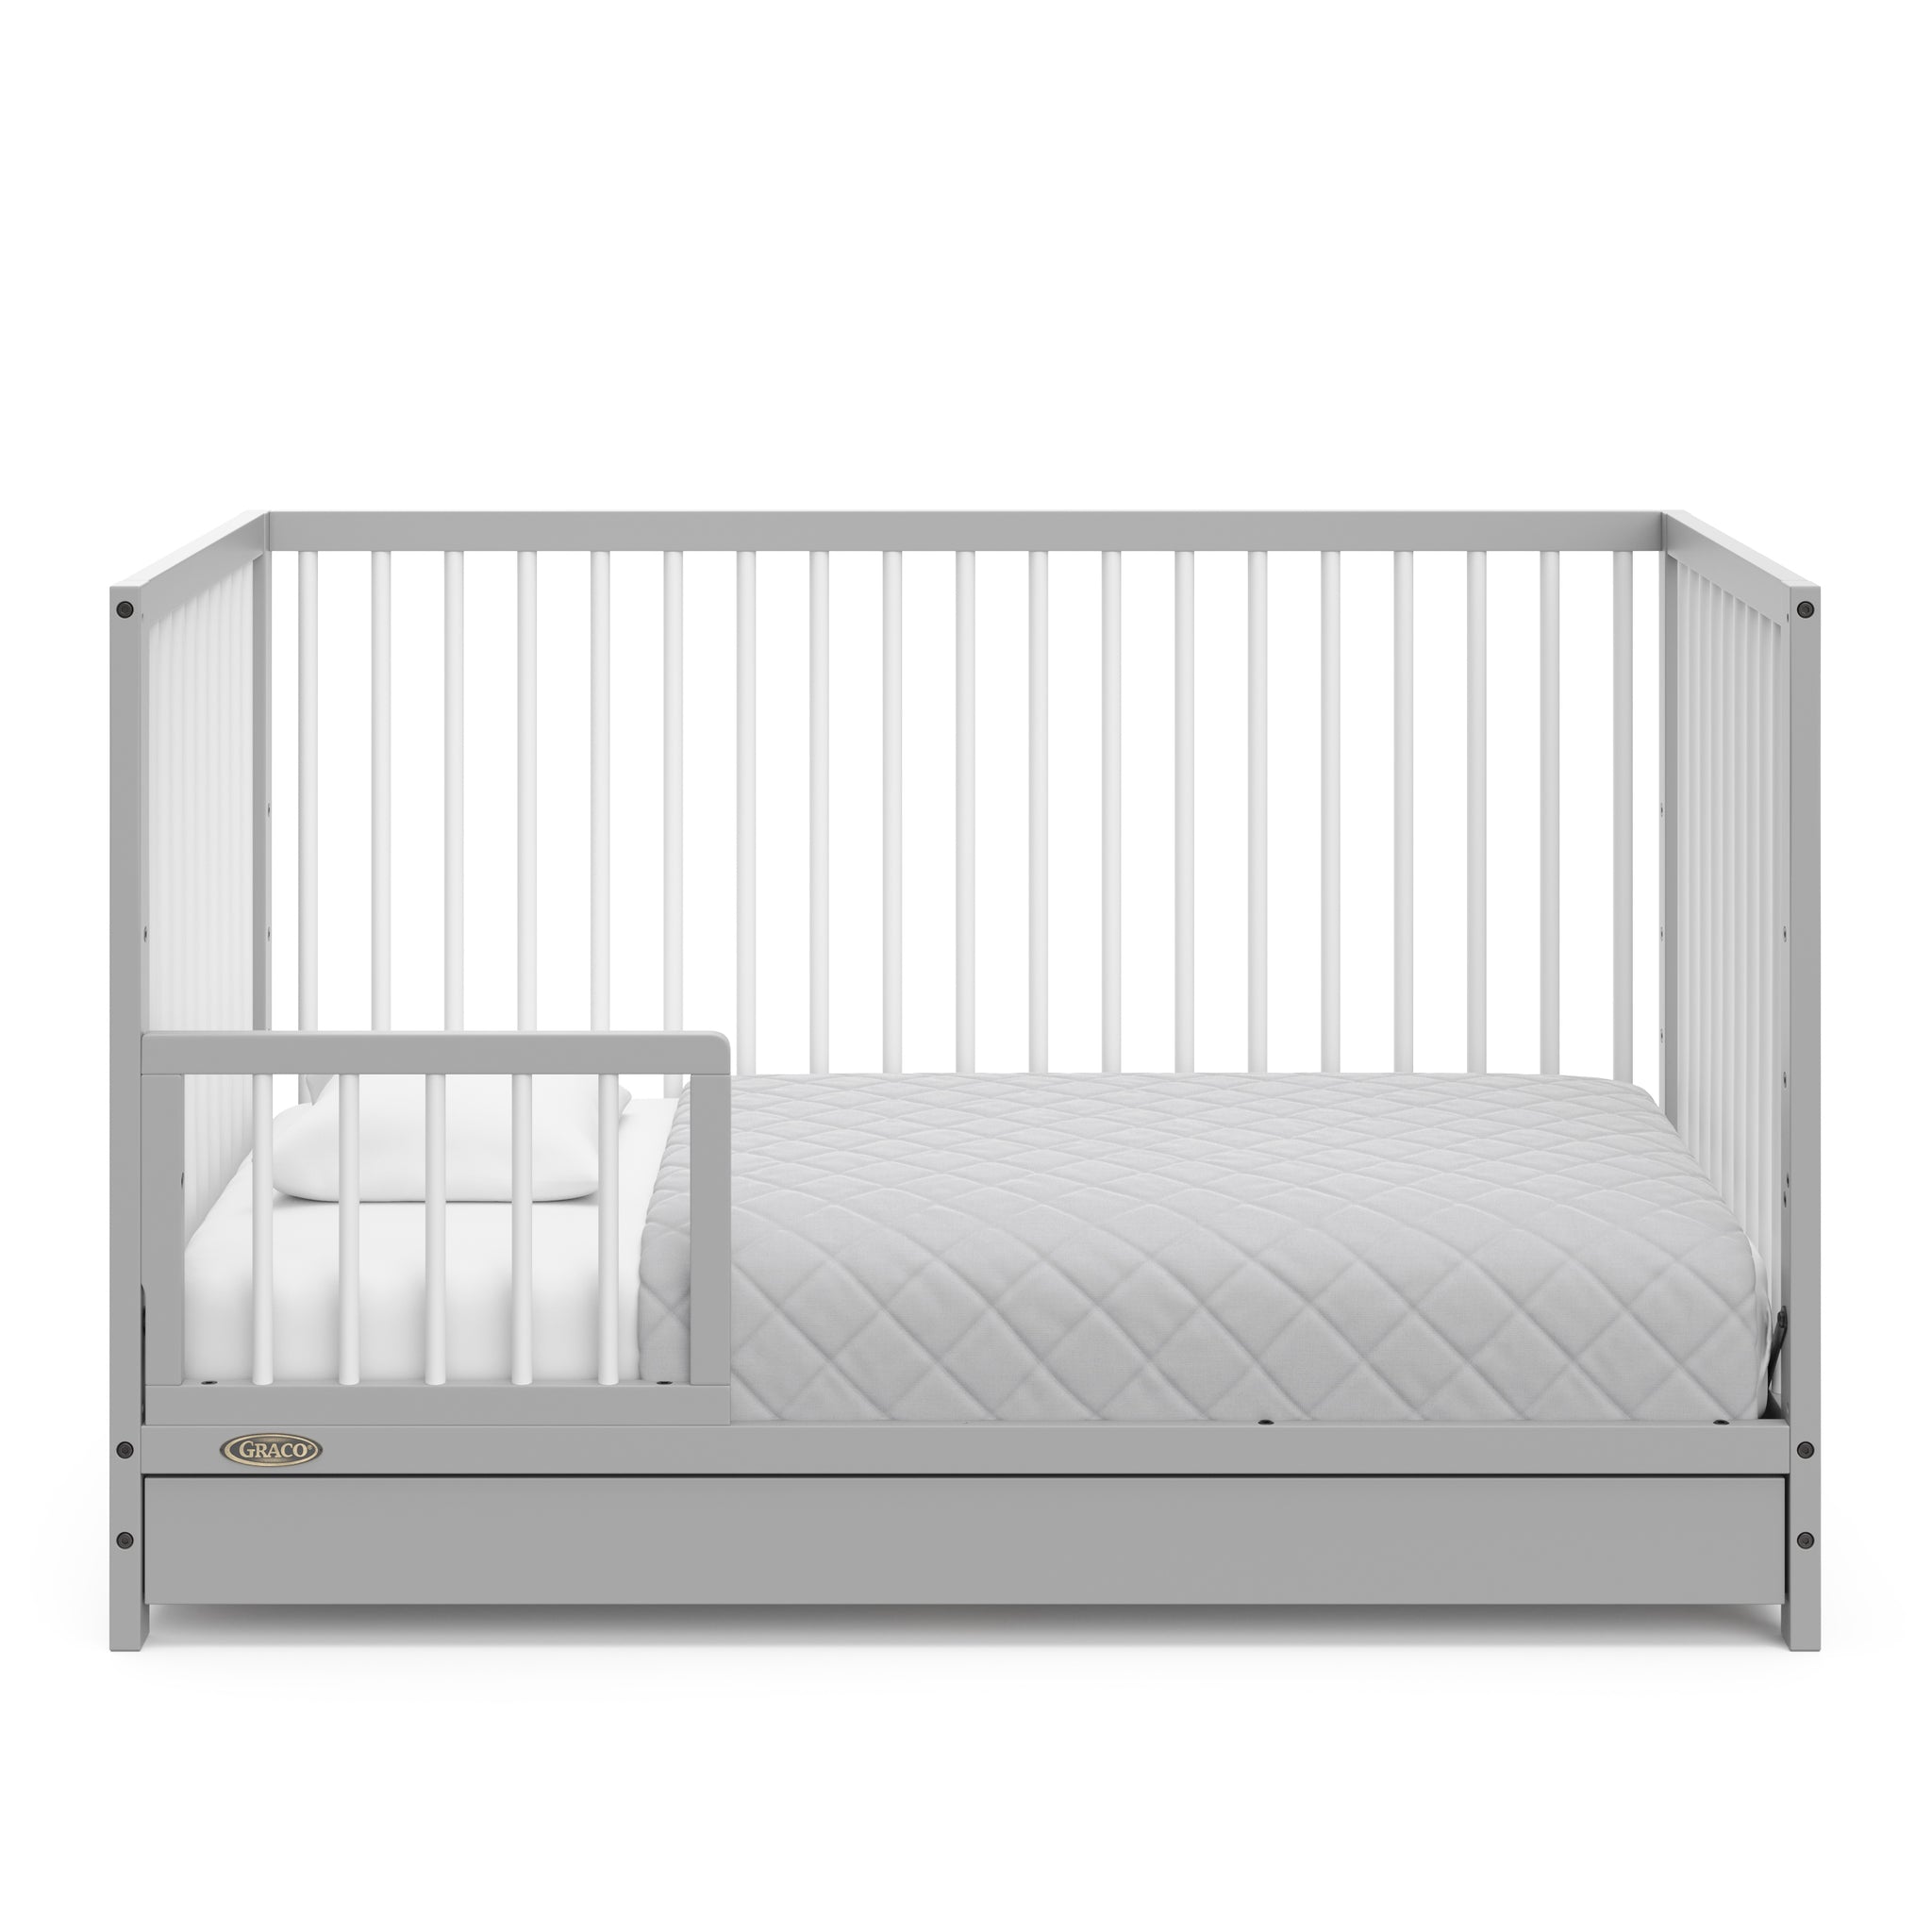 Pebble gray with white crib with drawer in toddler bed conversion with one safety guardrailPebble gray crib with drawer in toddler bed conversion with two safety guardrail